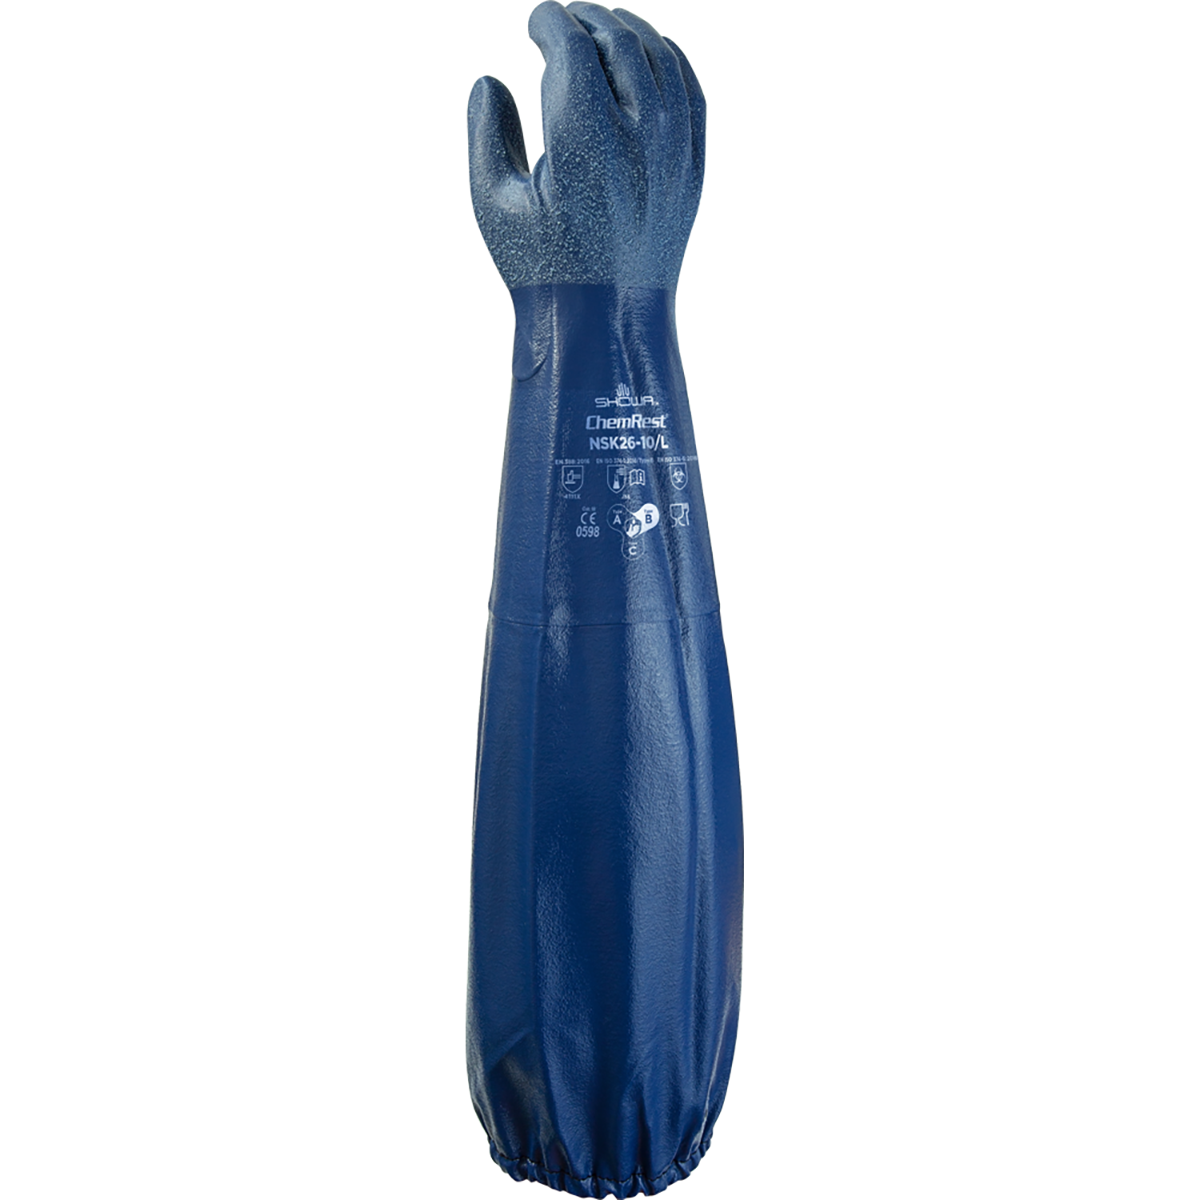 Airgas - MEG9637XSM - Memphis Glove Gray X-Small 7 Gauge Cotton And  Polyester String Knit Work Gloves With Knit Wrist